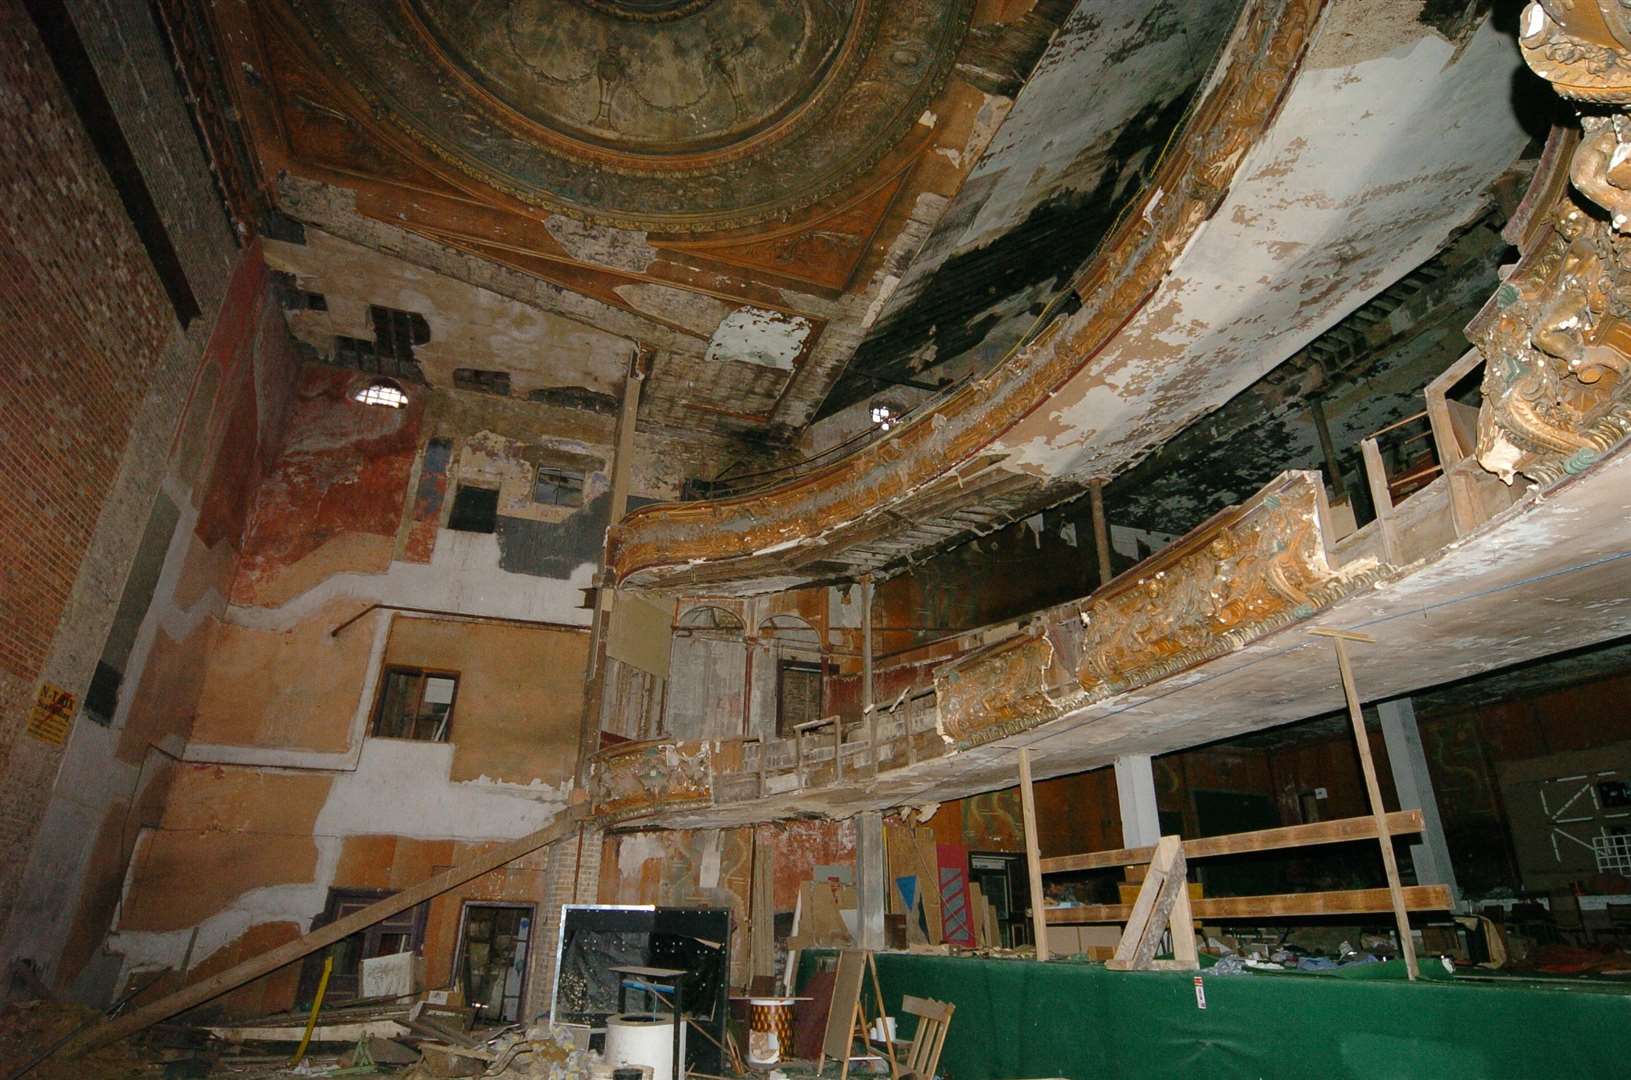 The auditorium, which is now long since demolished, used to hold 3,000 people